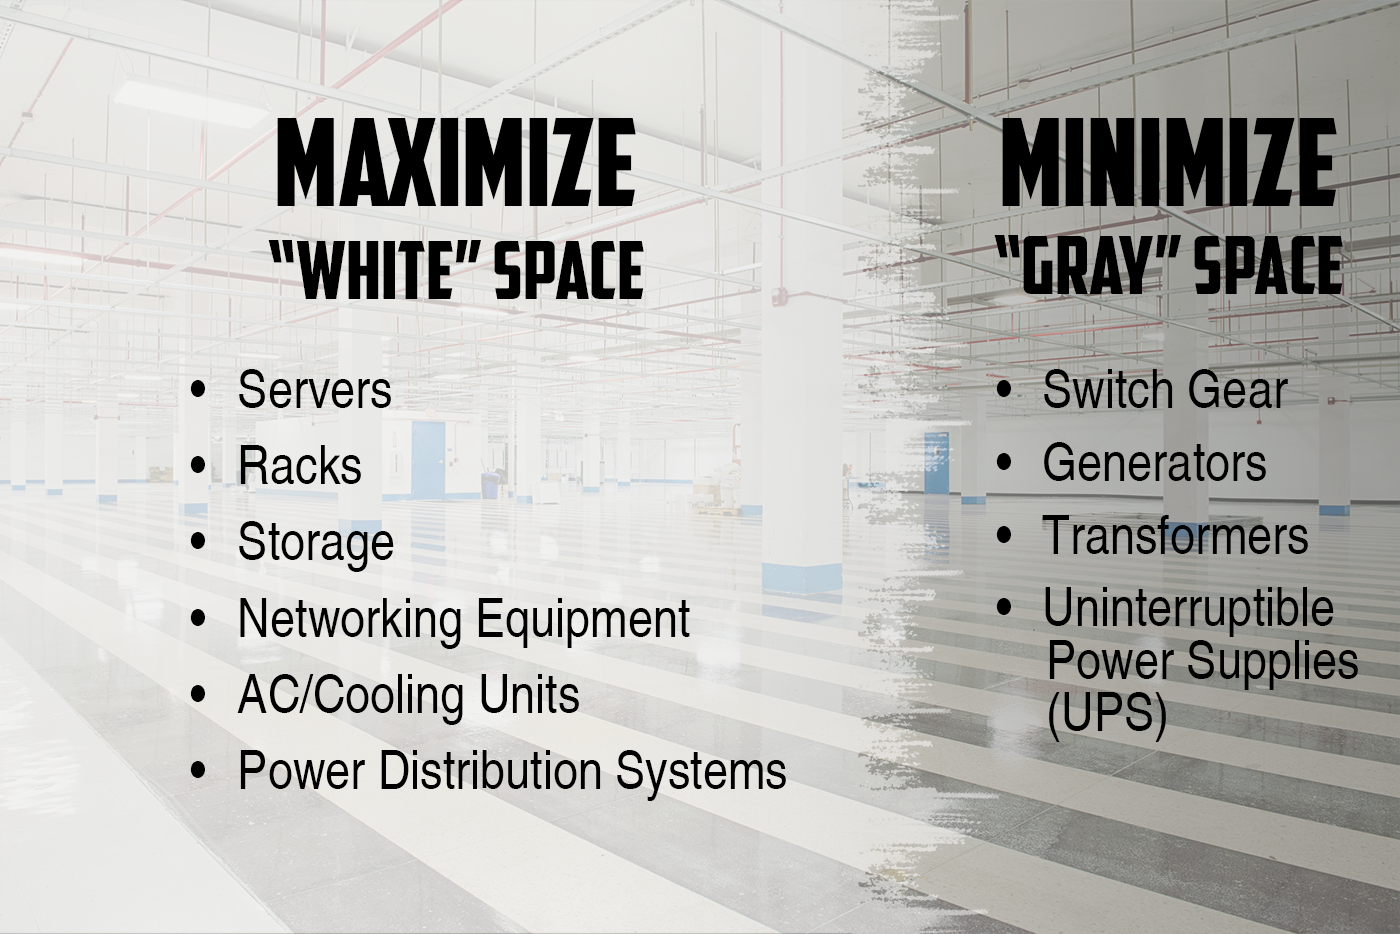 White space is the revenue-generating area of a data center. It includes all the IT equipment: servers, racks, storage, networking equipment, air conditioning units, and power distribution systems. Gray space is a data center’s insurance policy and includes the back-end equipment such as switch gear, uninterruptible power supplies (UPS), transformers, and back-up generators.